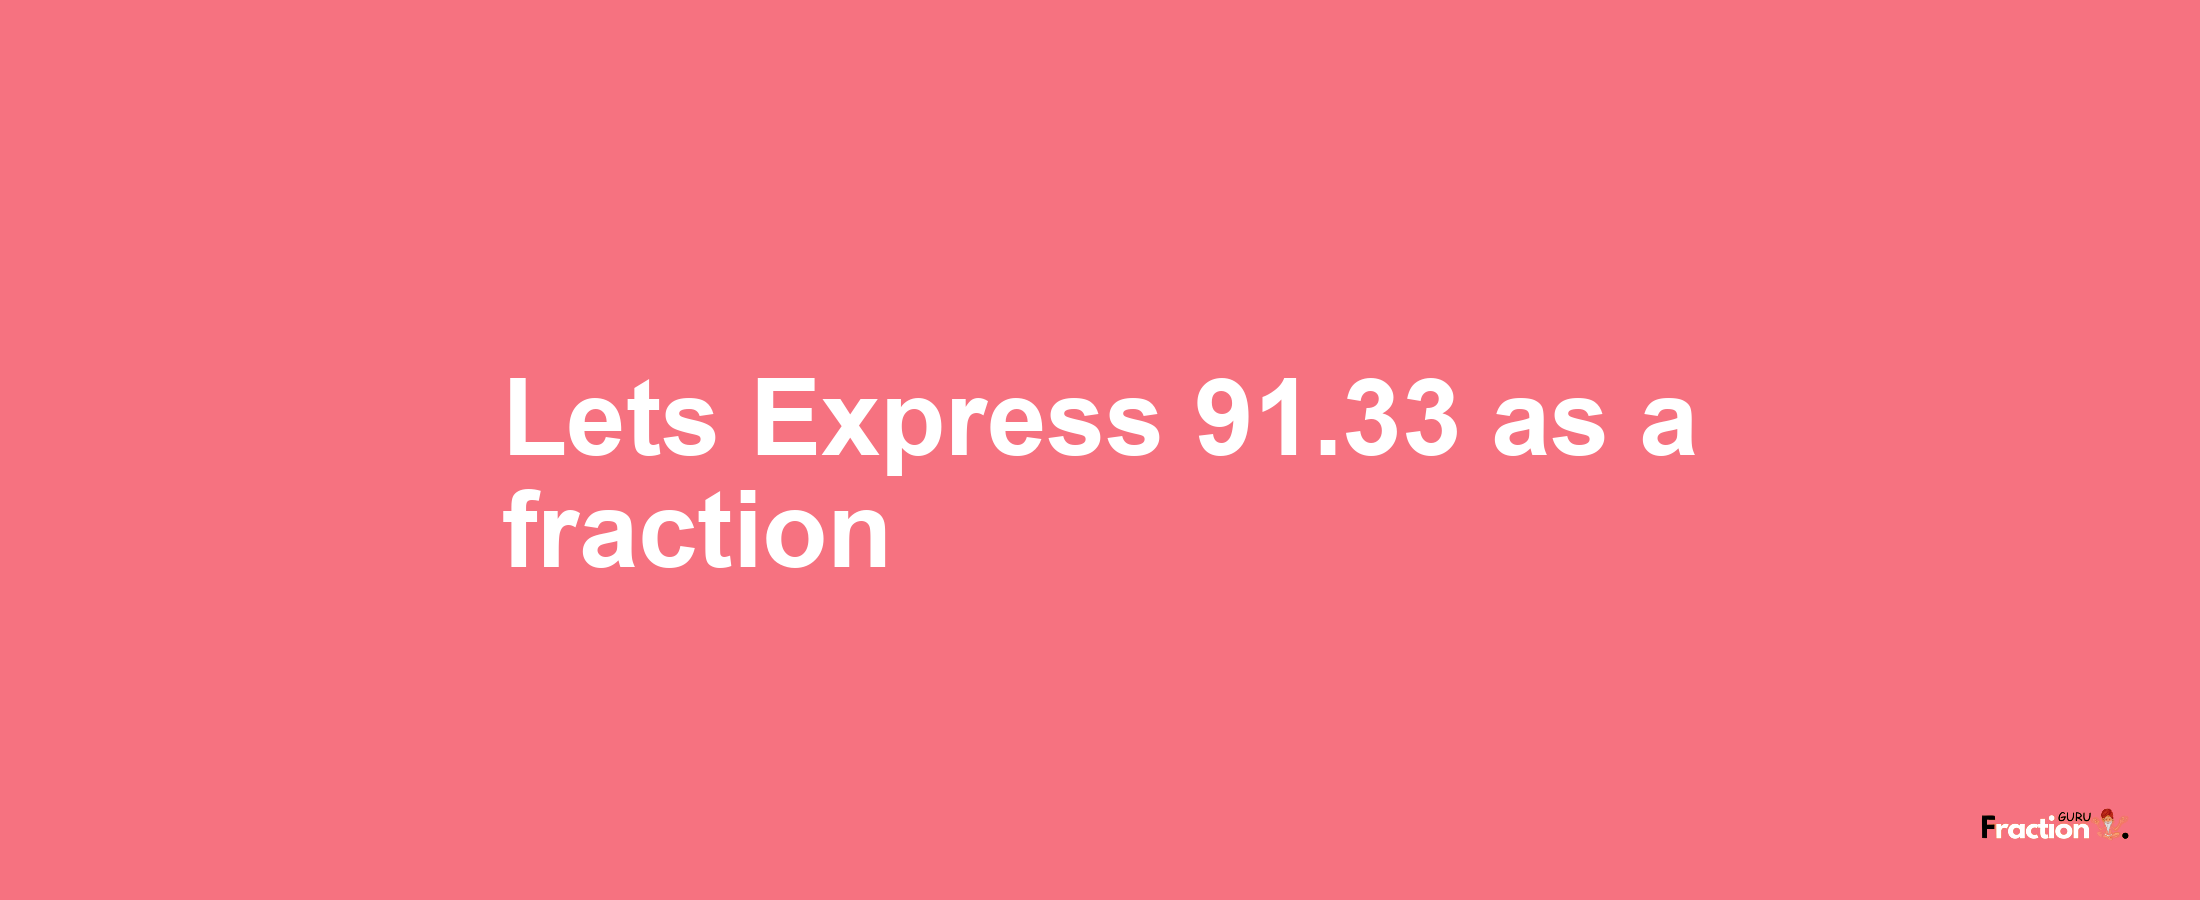 Lets Express 91.33 as afraction